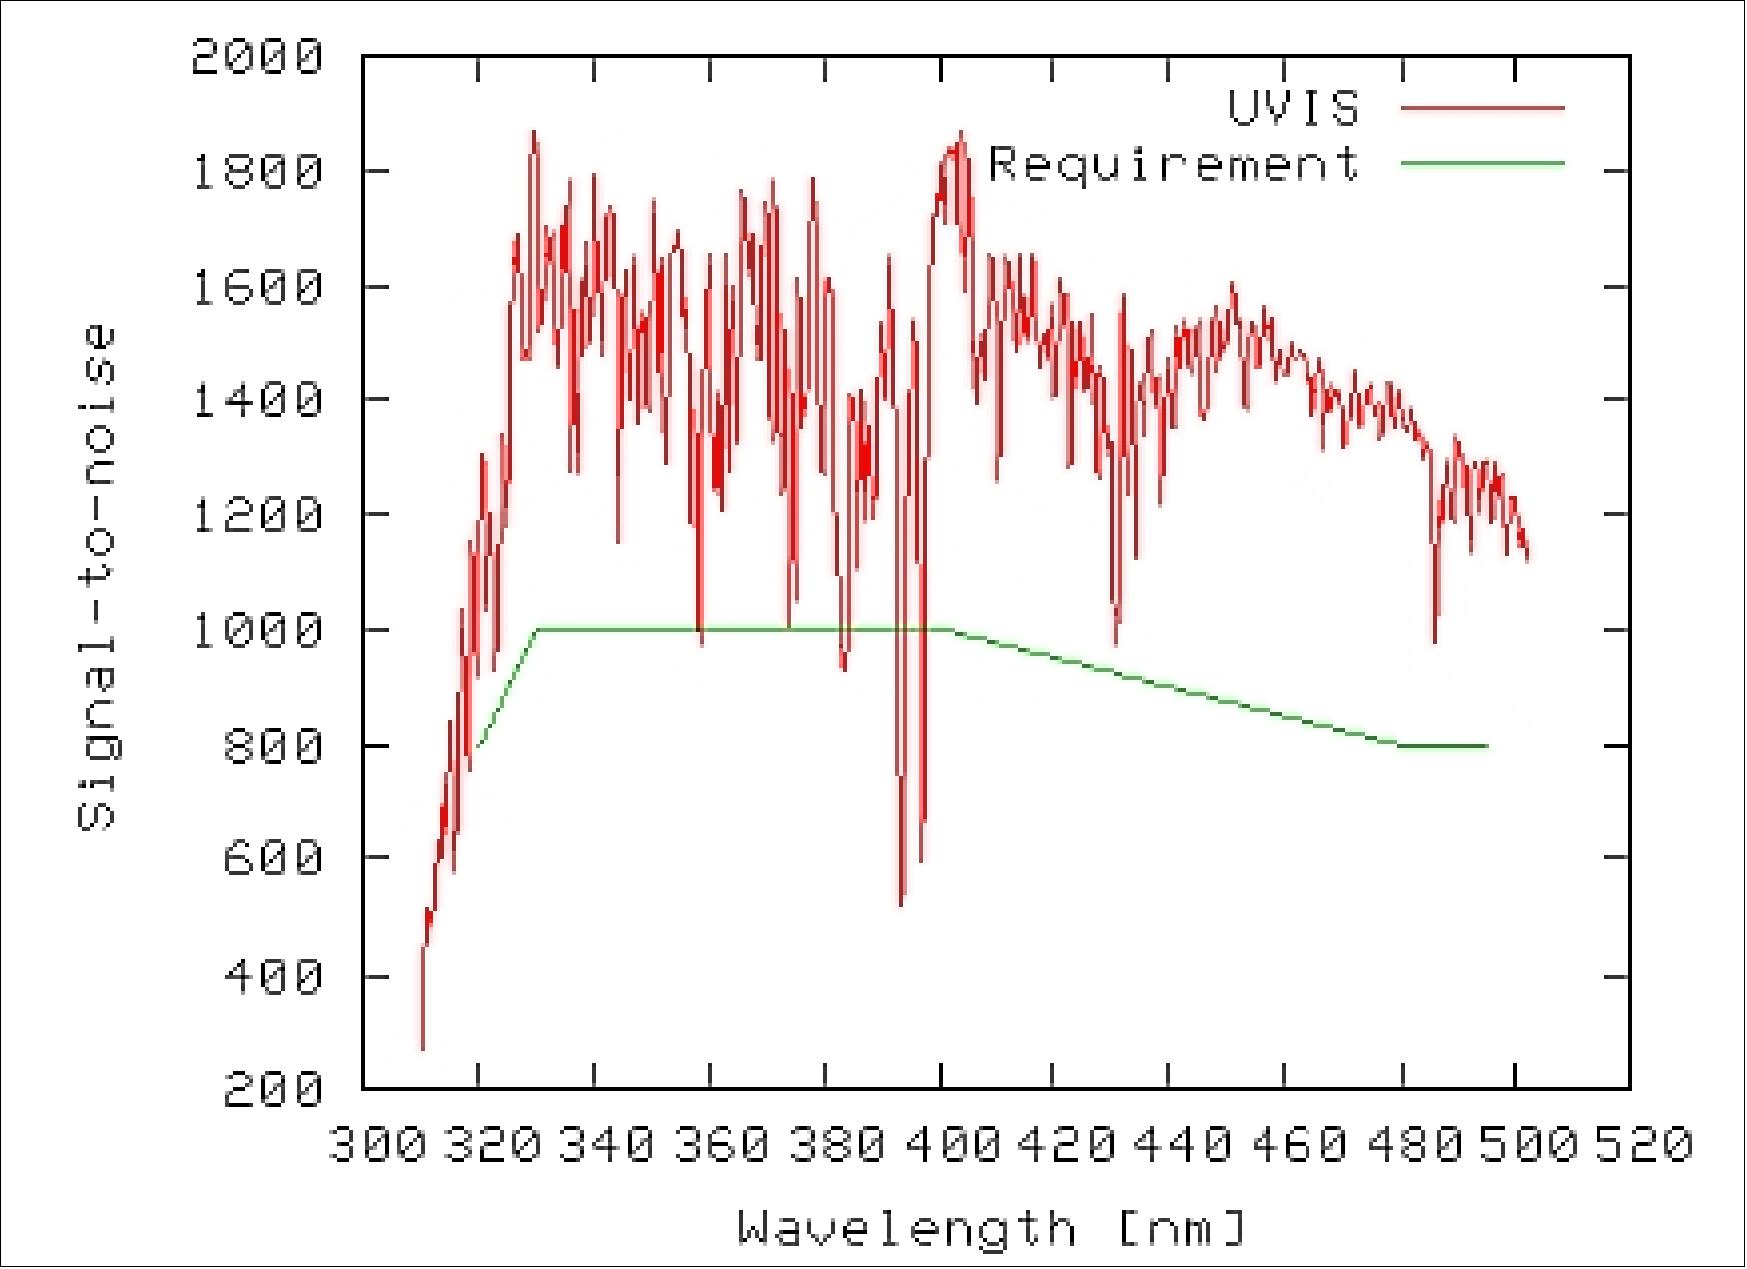 Figure 107: SNR spectrum of the UVIS spectrograph for end-of-life conditions together with requirement (image credit: SRON, TNO)